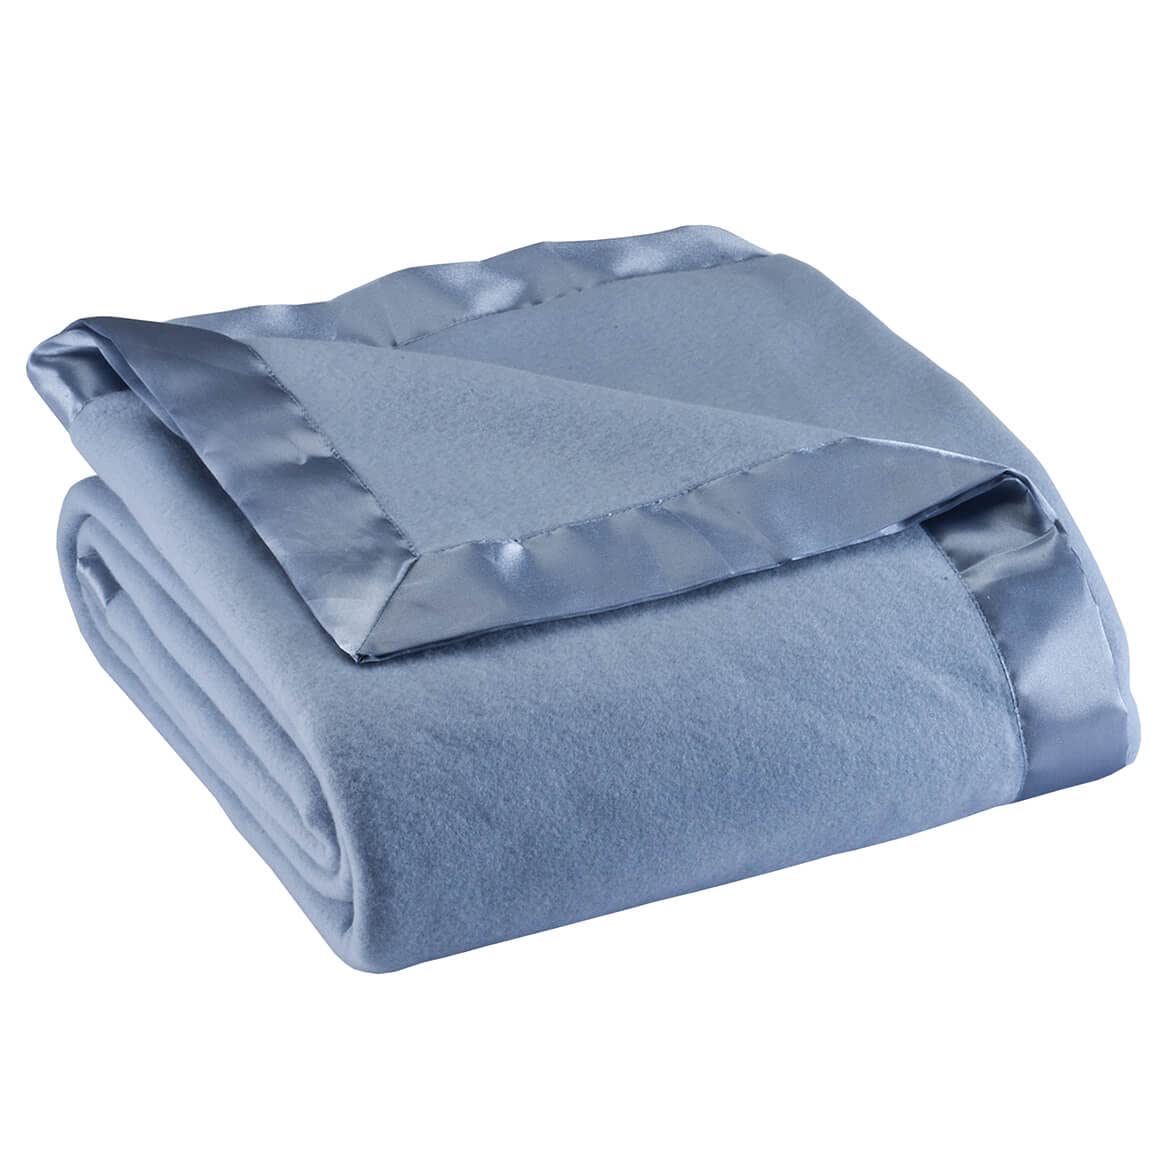 Book Cover OakRidge Satin Fleece Blanket, Full/Queen, Twin or King Size – 100% Polyester Lightweight Fabric and Cozy Satin Binding Edges in Tightly Folding Travel Blanket, Blue Blue King